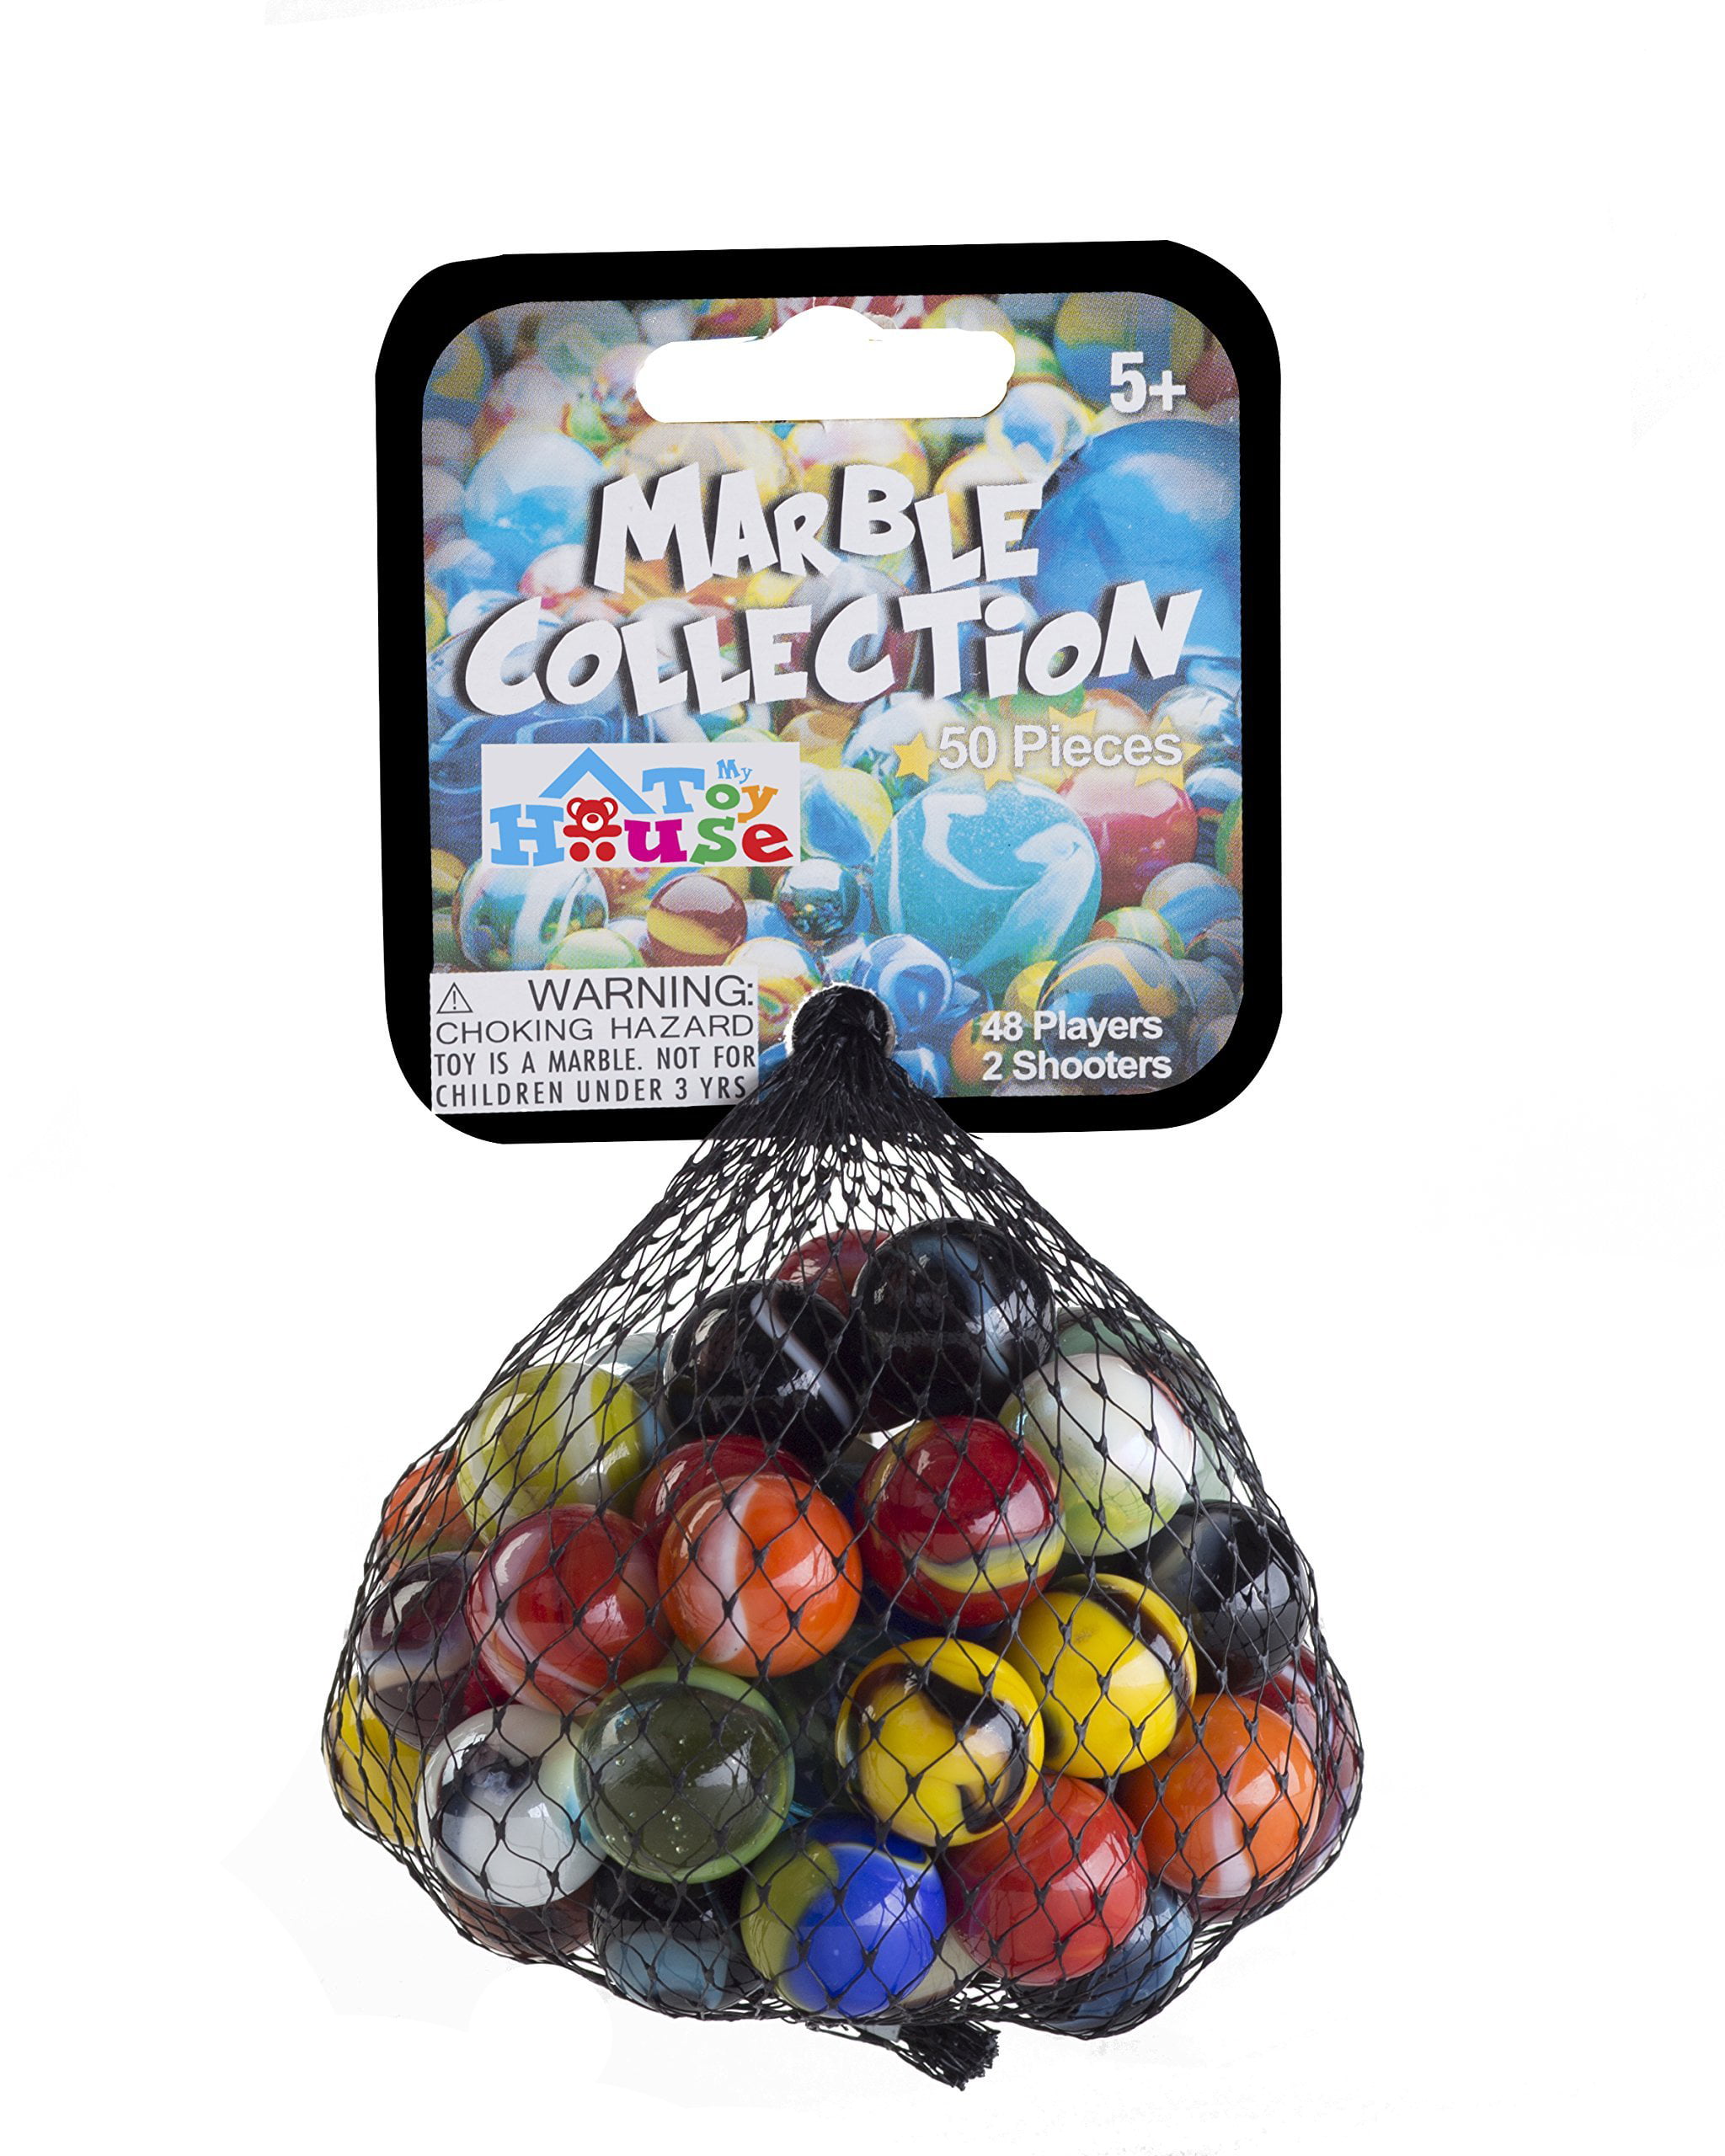 Set OF 50 Glass Marbles Bulk Assorted Colors 48 Players and 2 Shooters Styles 